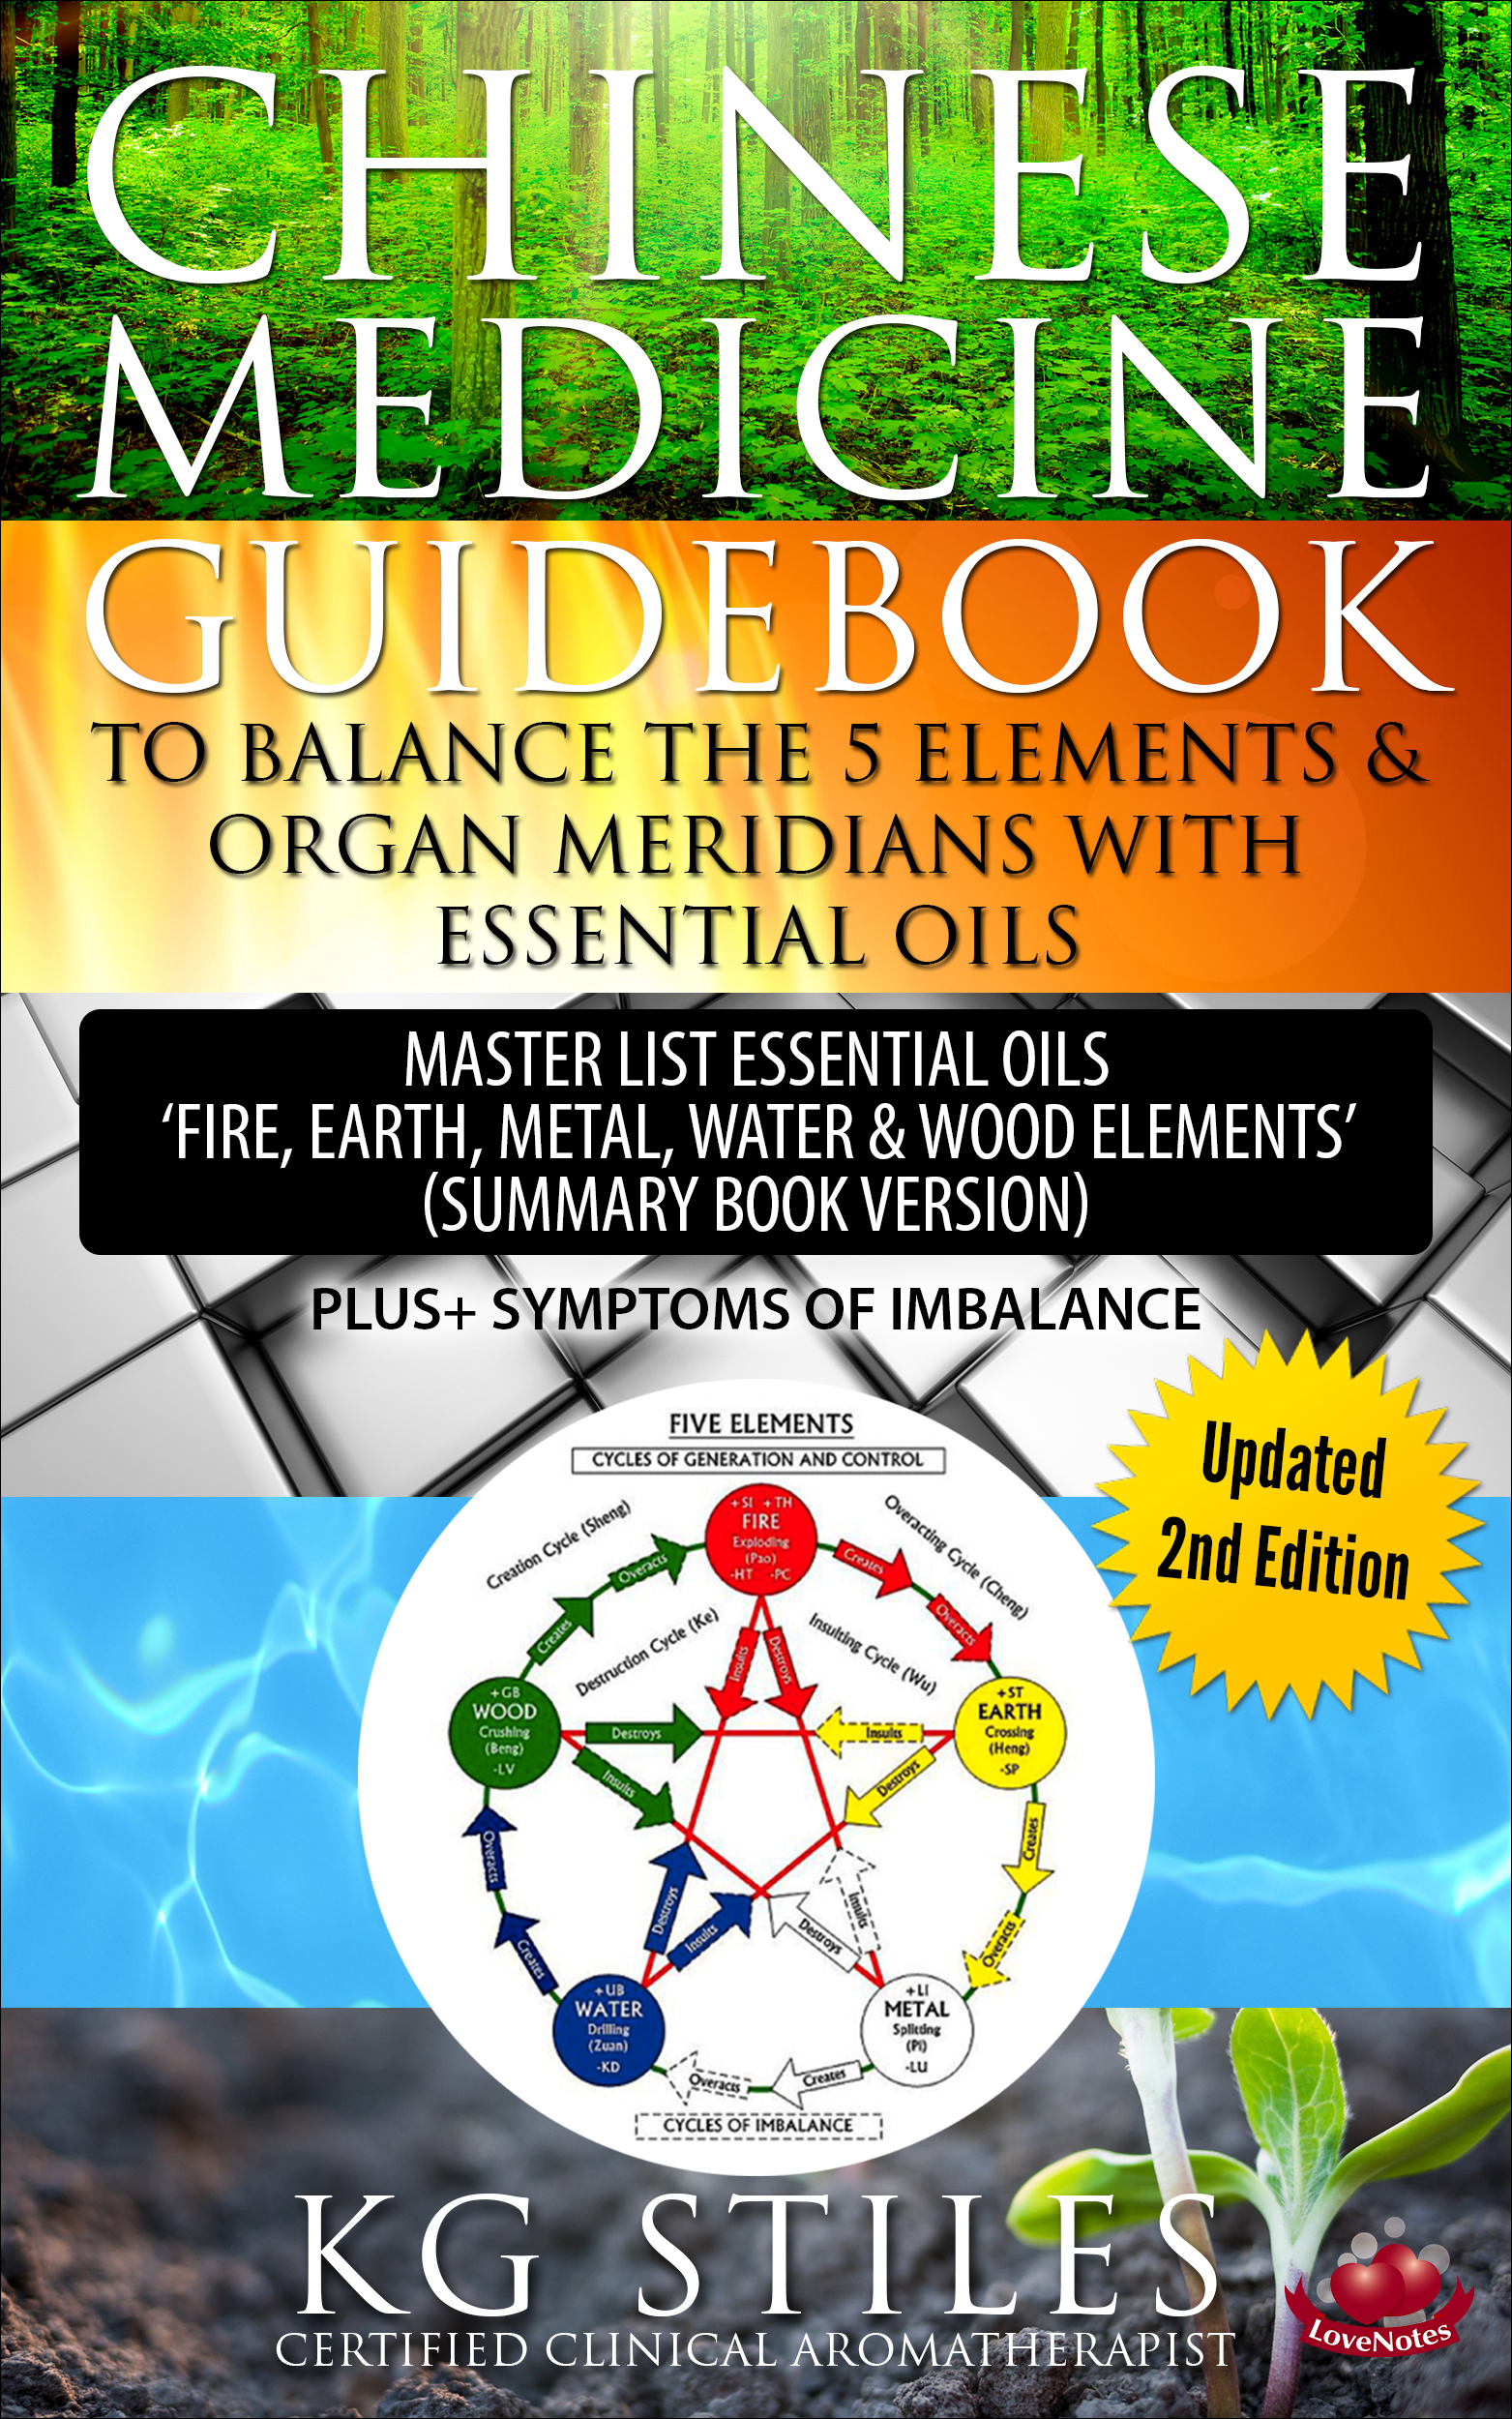 The Chinese Medicine Guidebook to Balance the 5 Elements & Organ Meridians with Essential Oils (Summary Version)